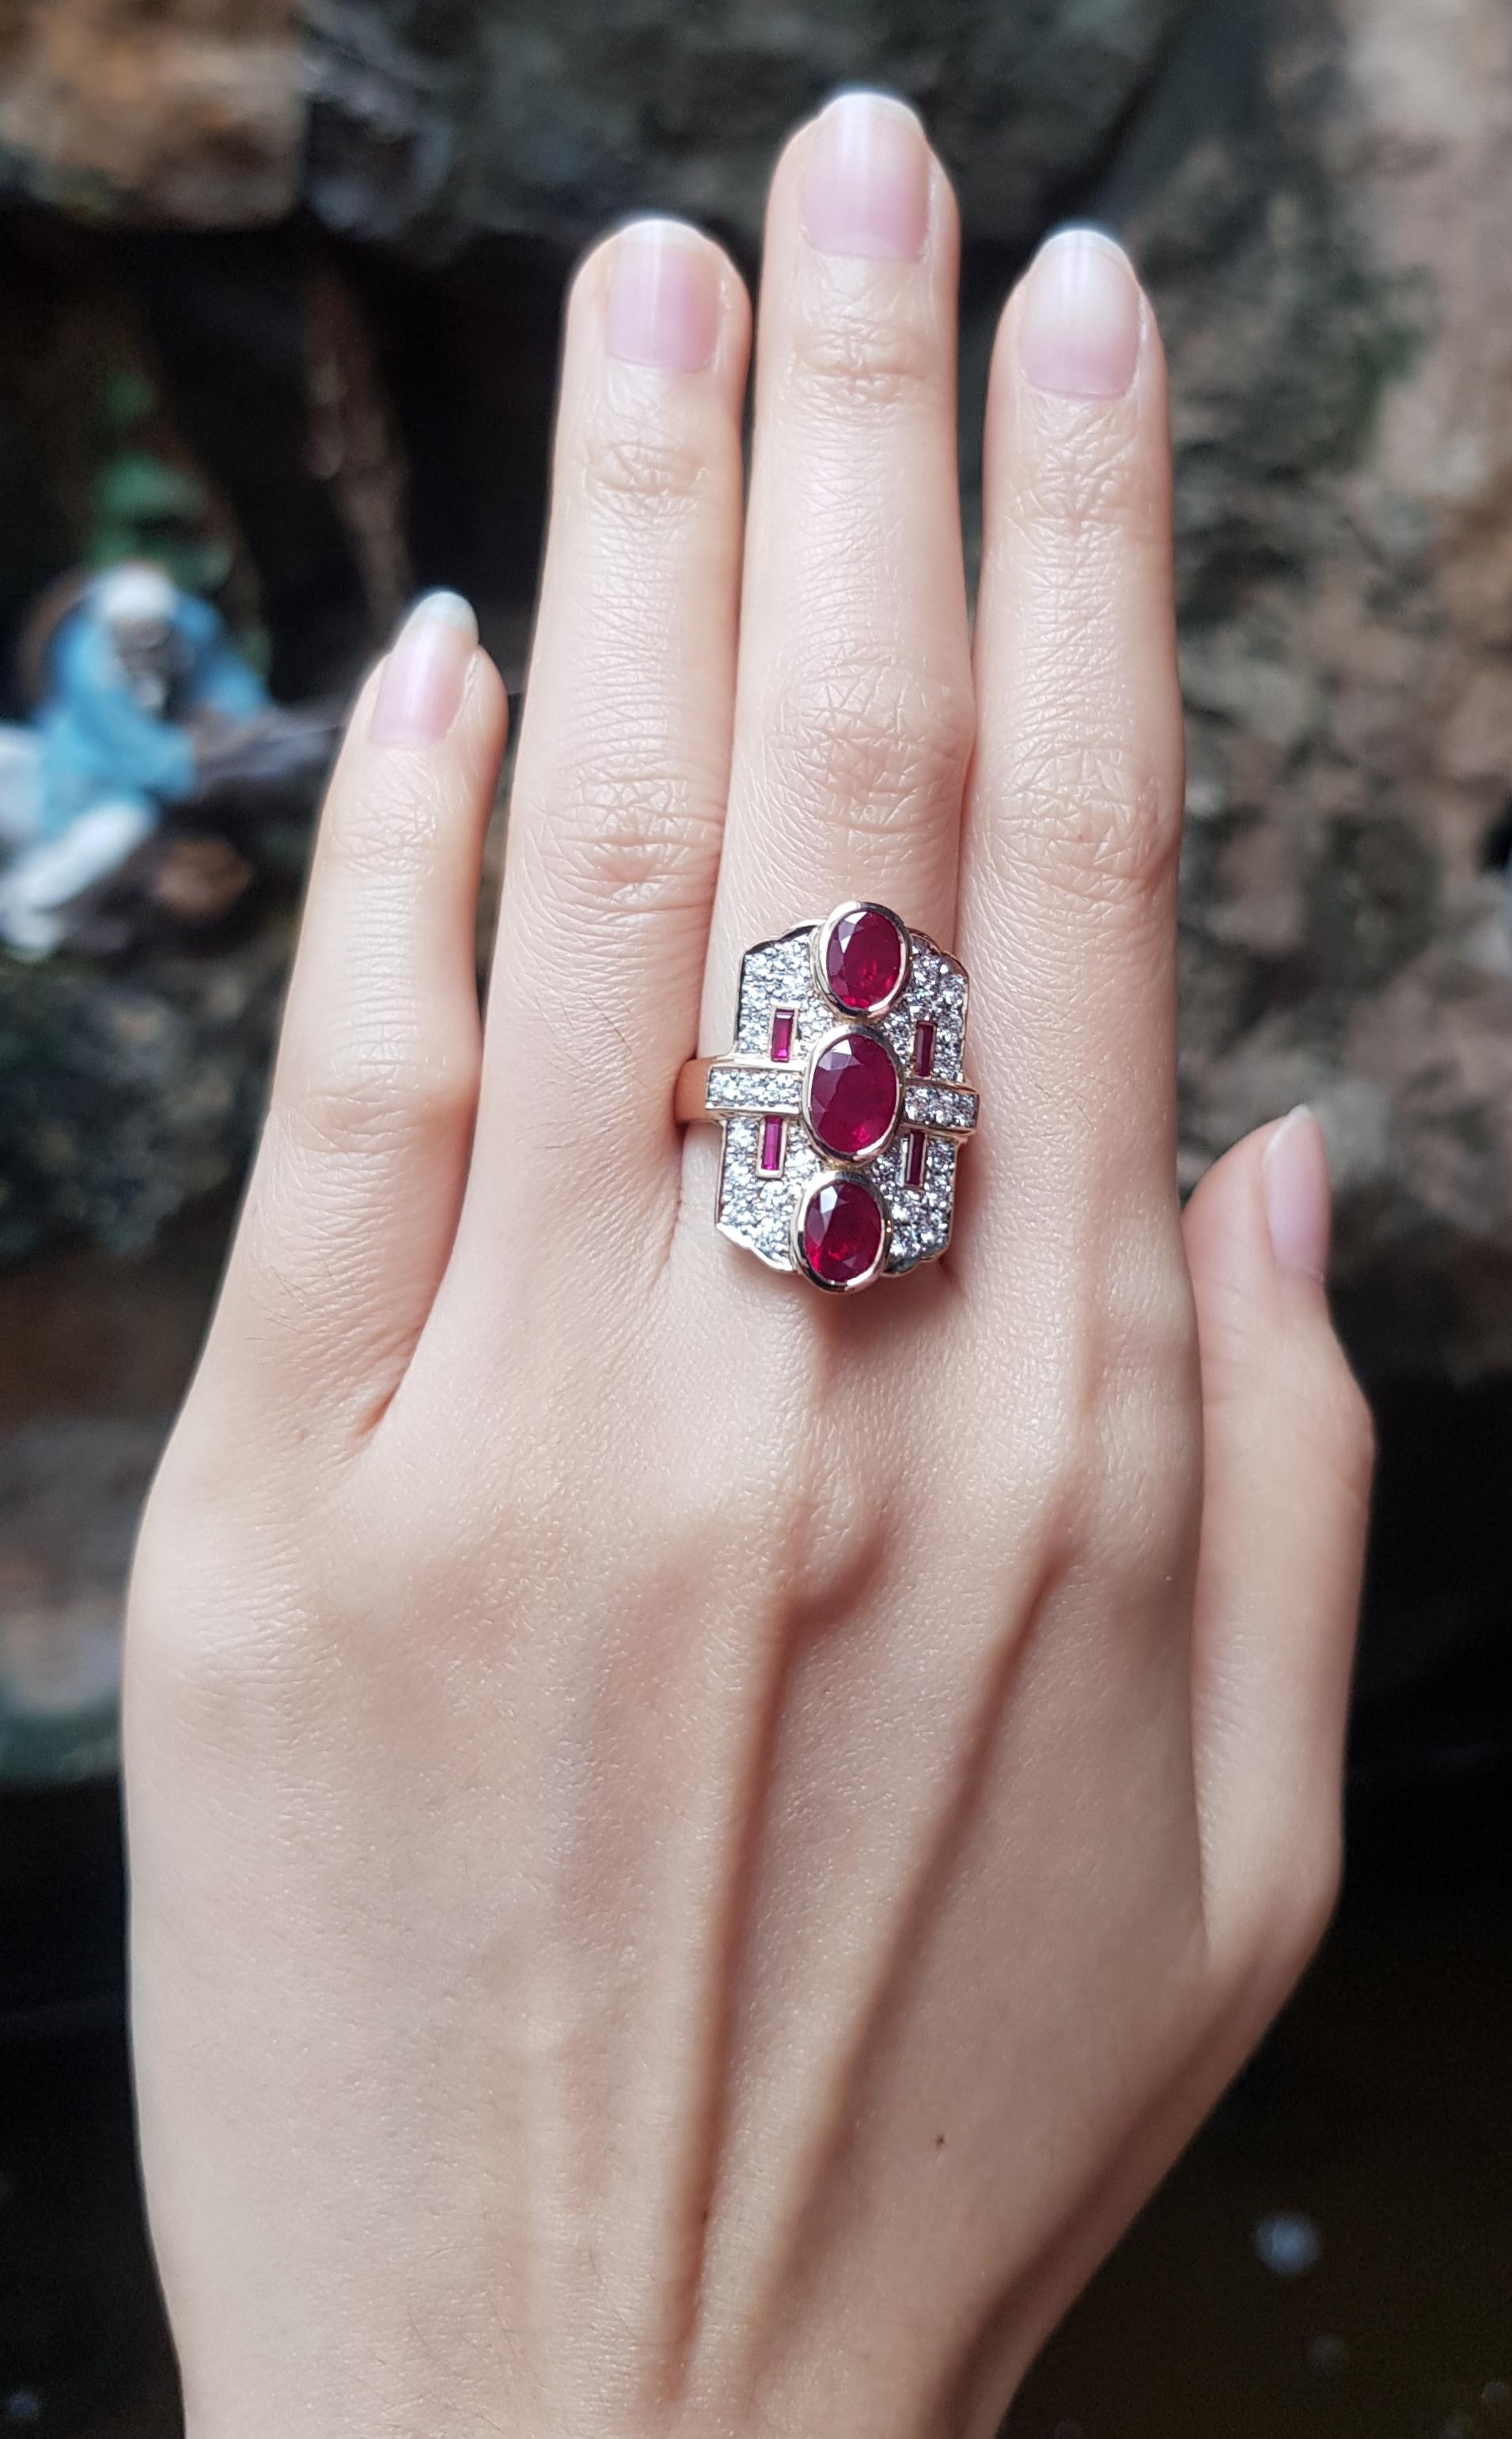 Ruby 2.84 carats with Diamond 0.81 carat Ring set in 18 Karat Rose Gold Settings

Width:  1.5 cm 
Length: 1.9 cm
Ring Size: 54
Total Weight: 11.08 grams

